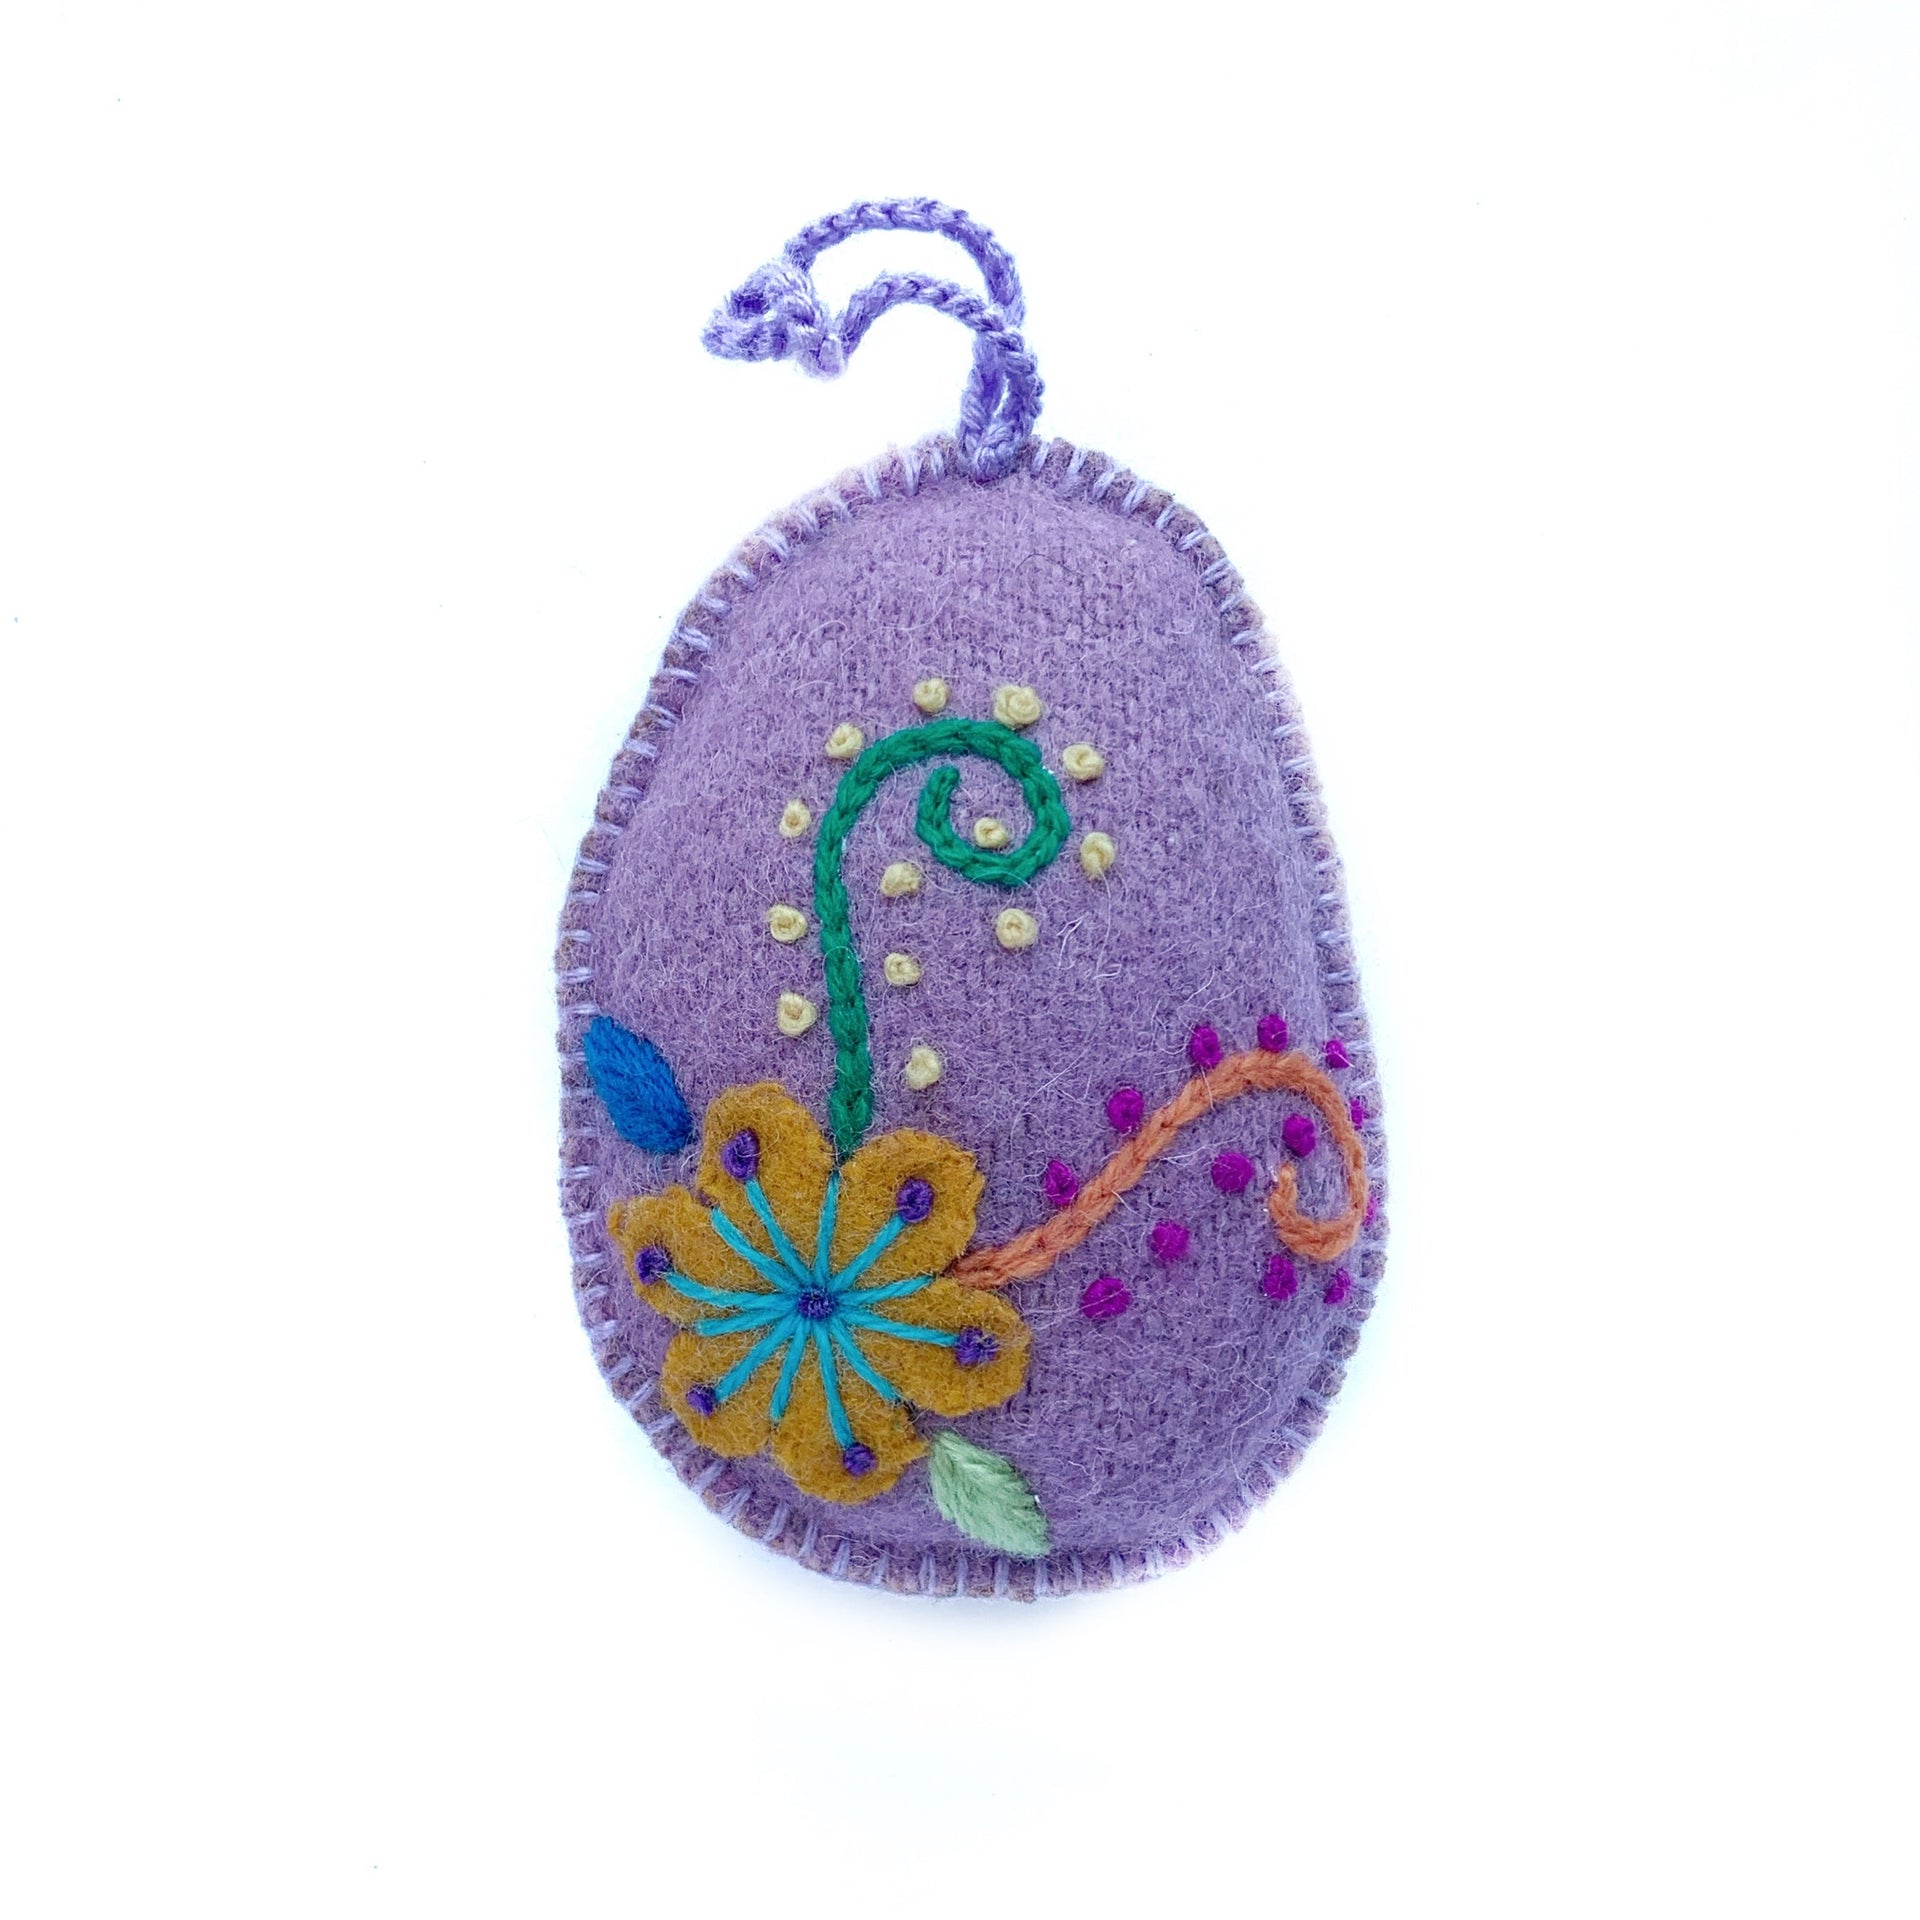 Soft purple pastel Easter egg ornament with hand embroidered flowers and designs.